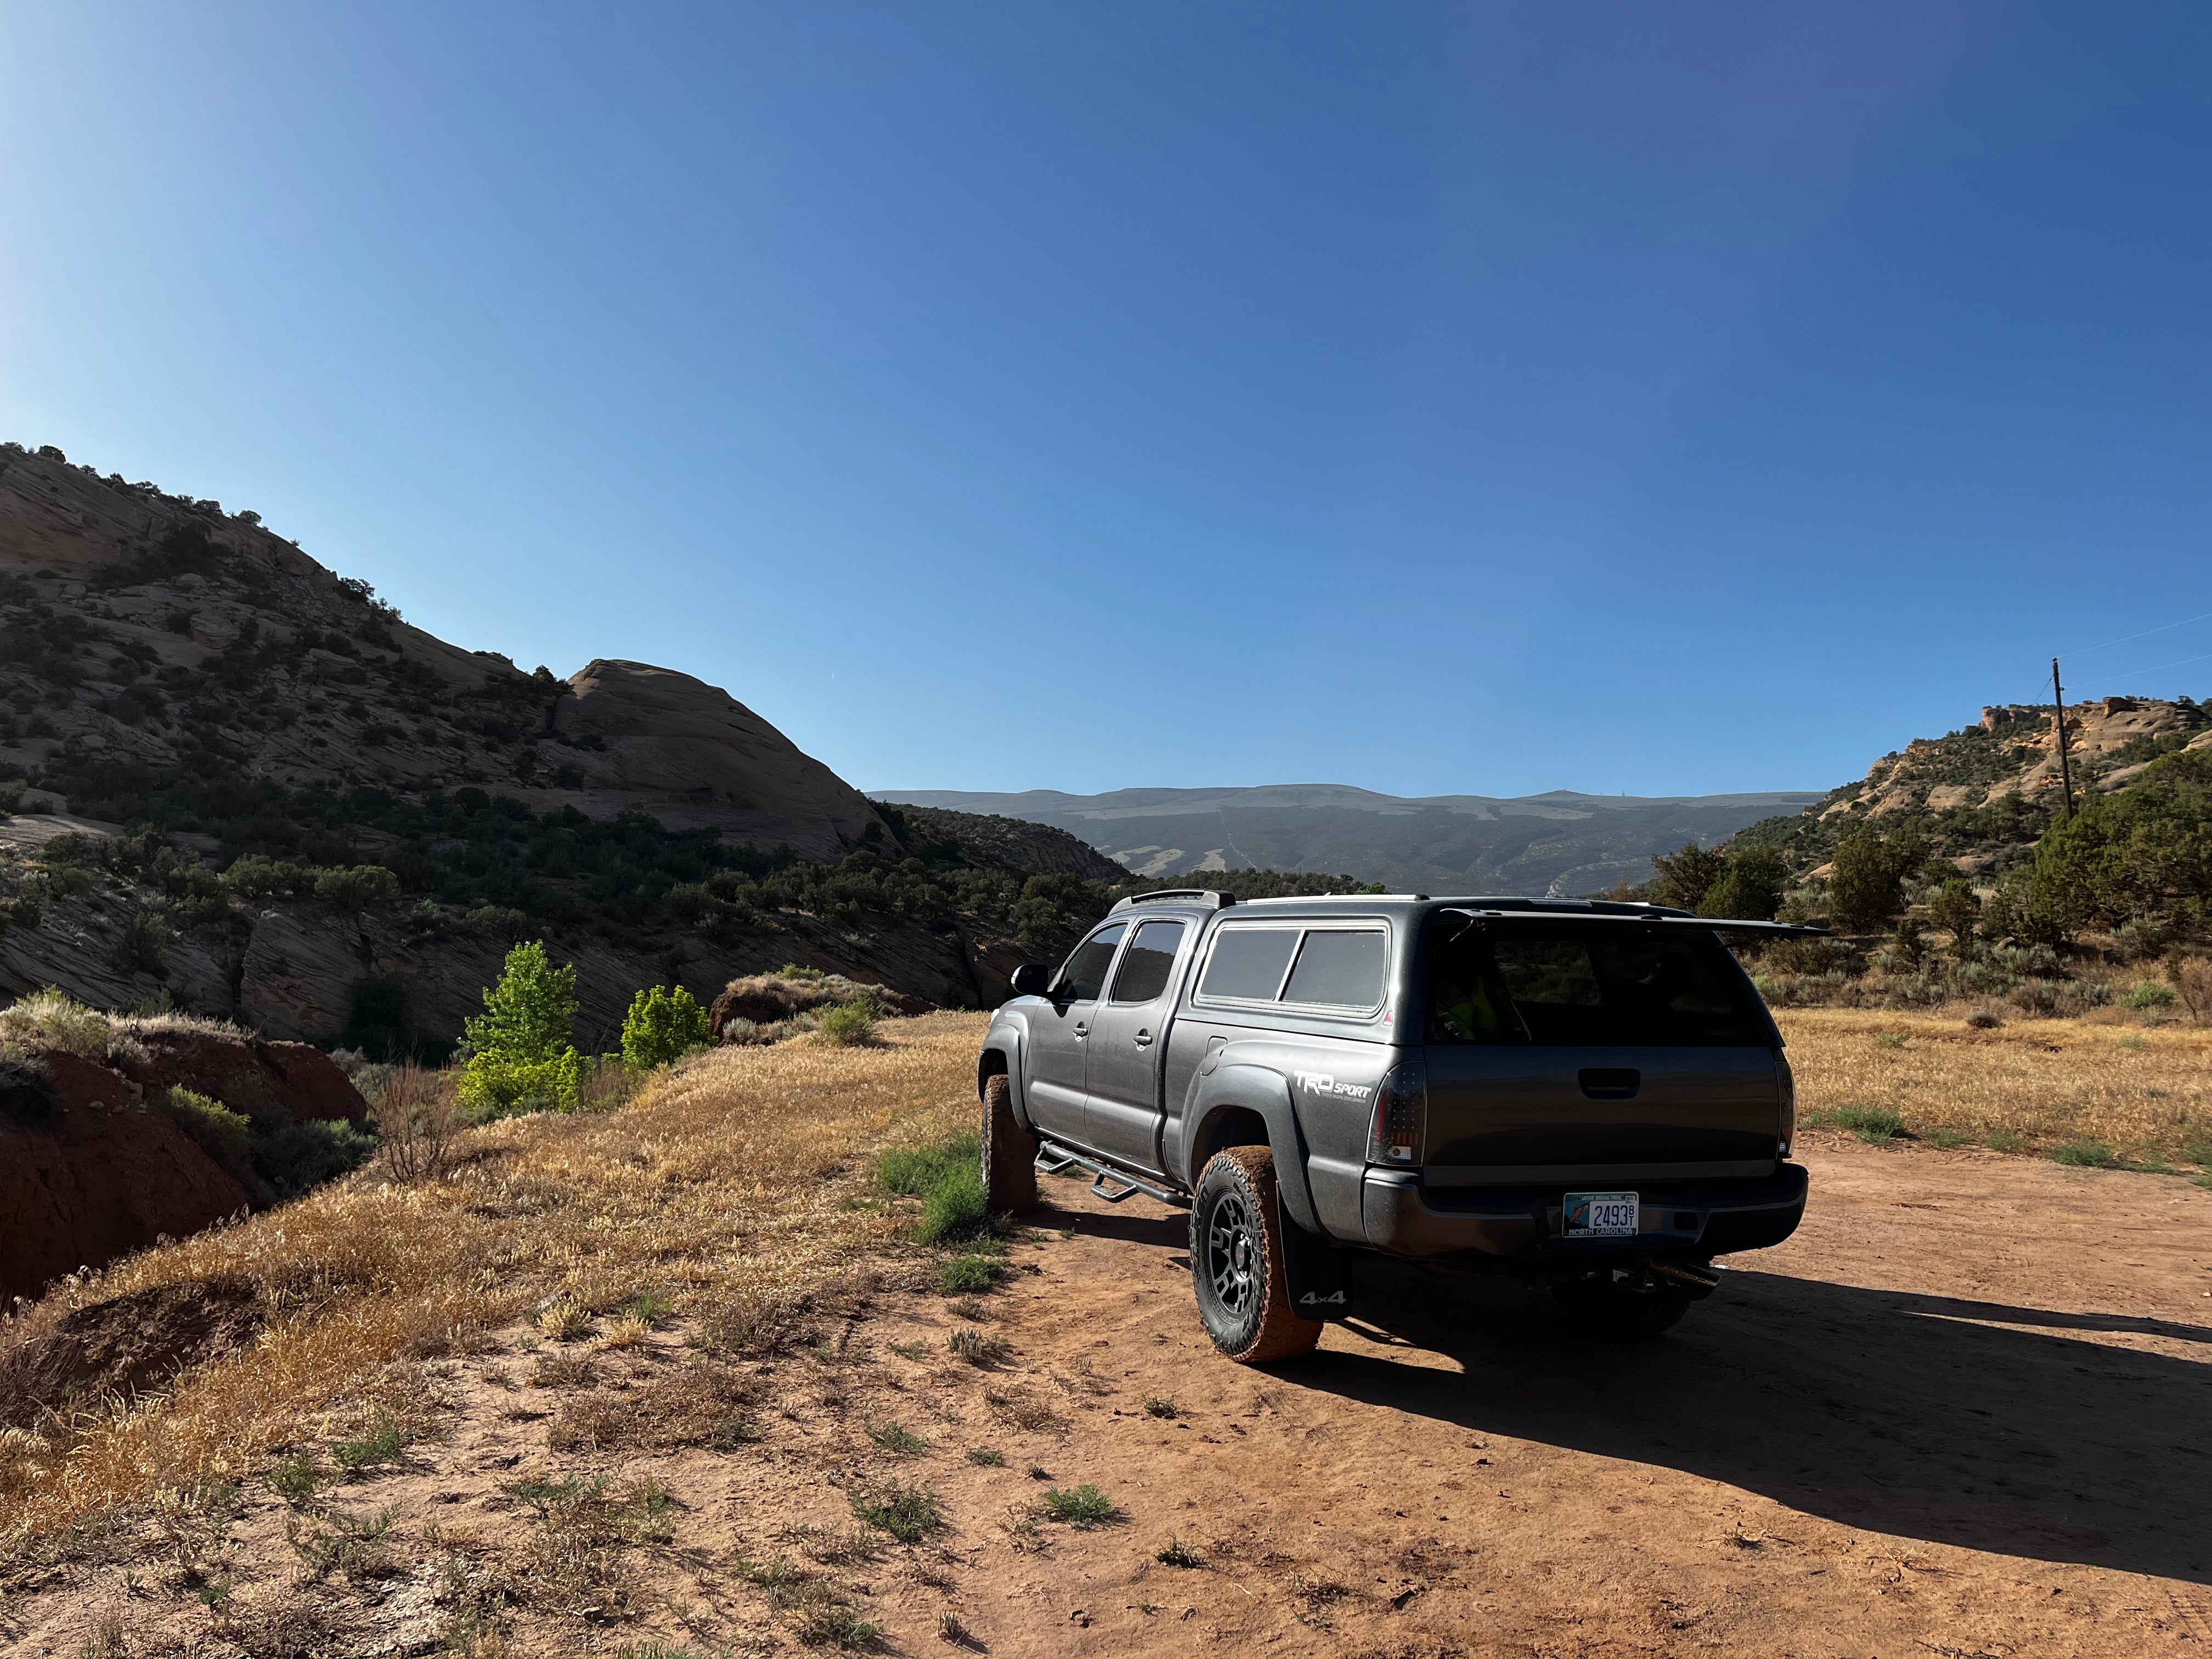 Camper submitted image from Dispersed Camping Near Dinosaur National Monument - 3